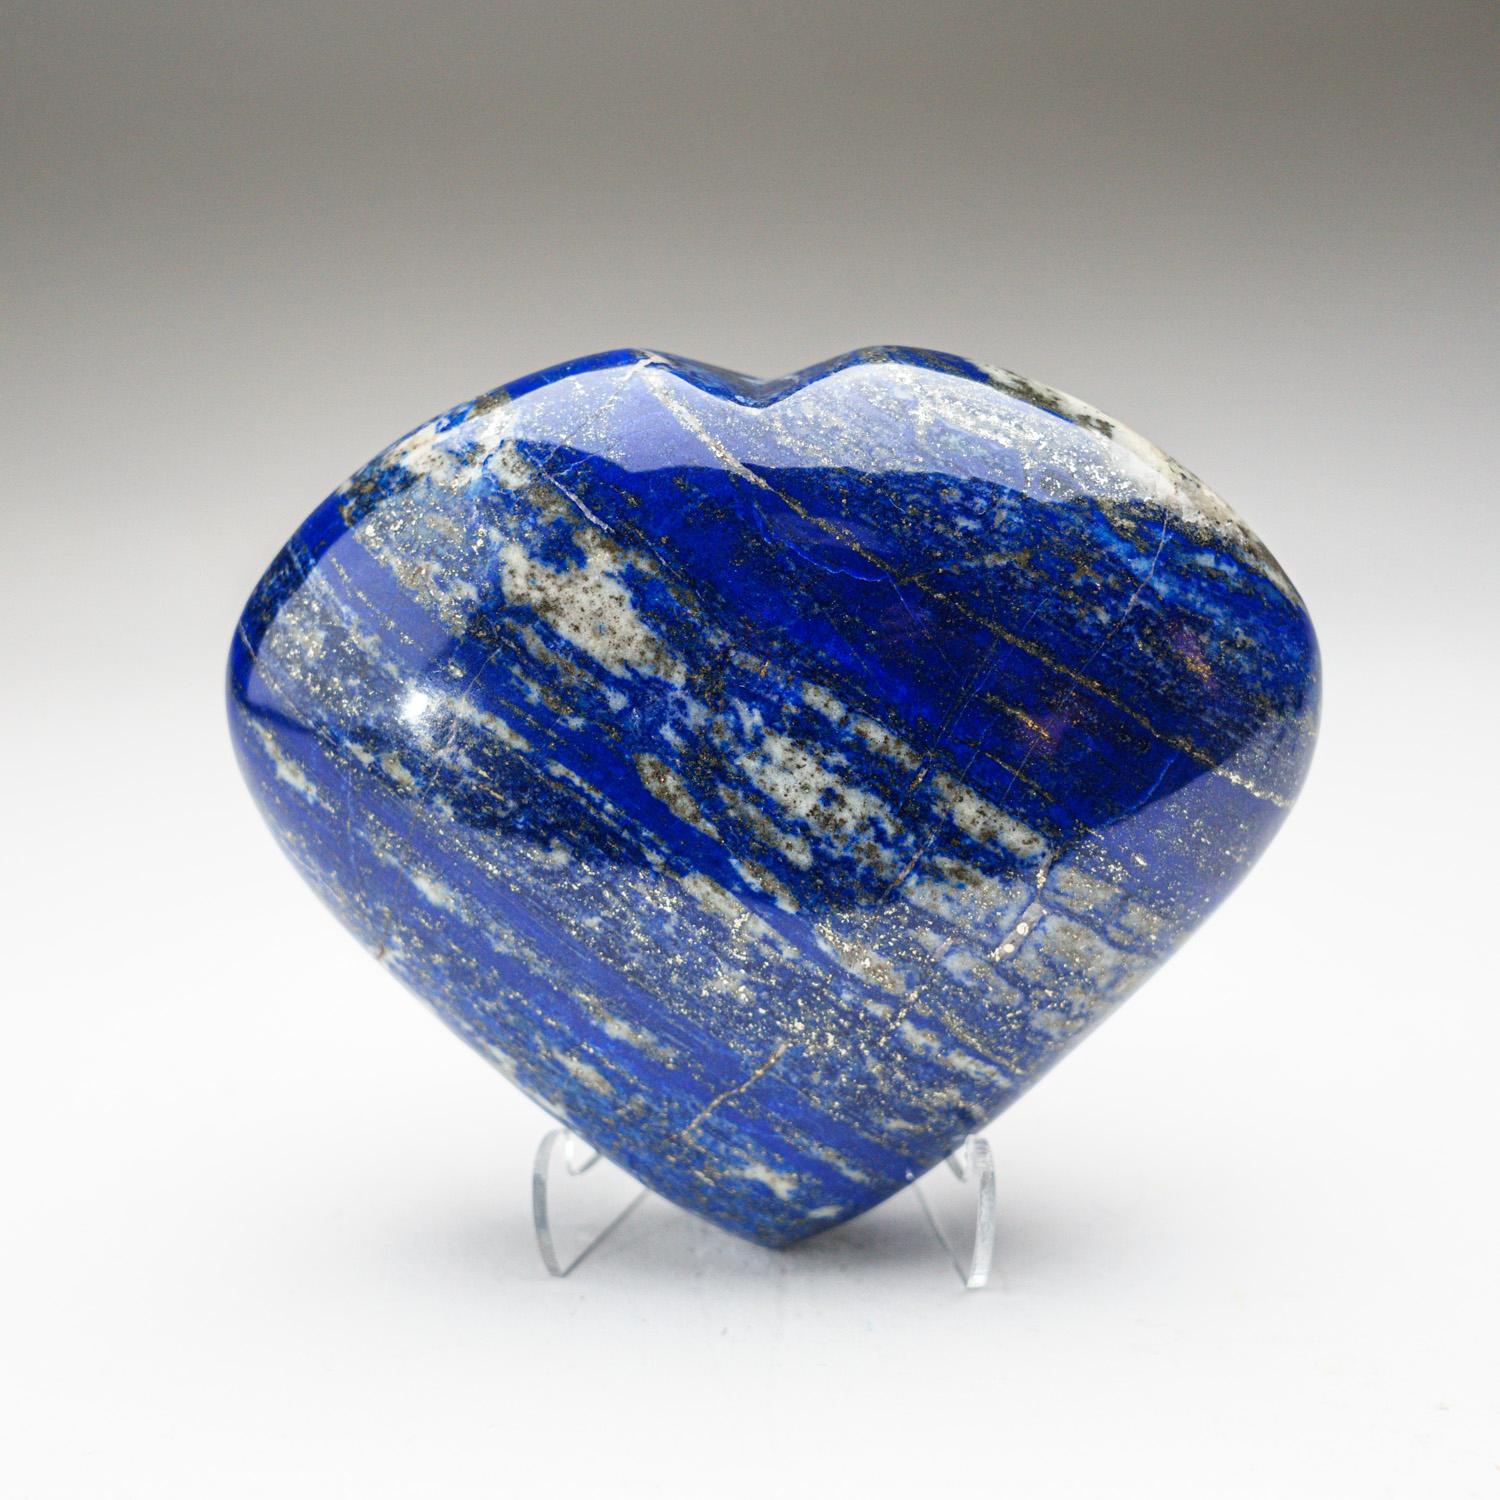 Lapis Lazuli Heart with Acrylic Display Stand (3 lbs) For Sale 1